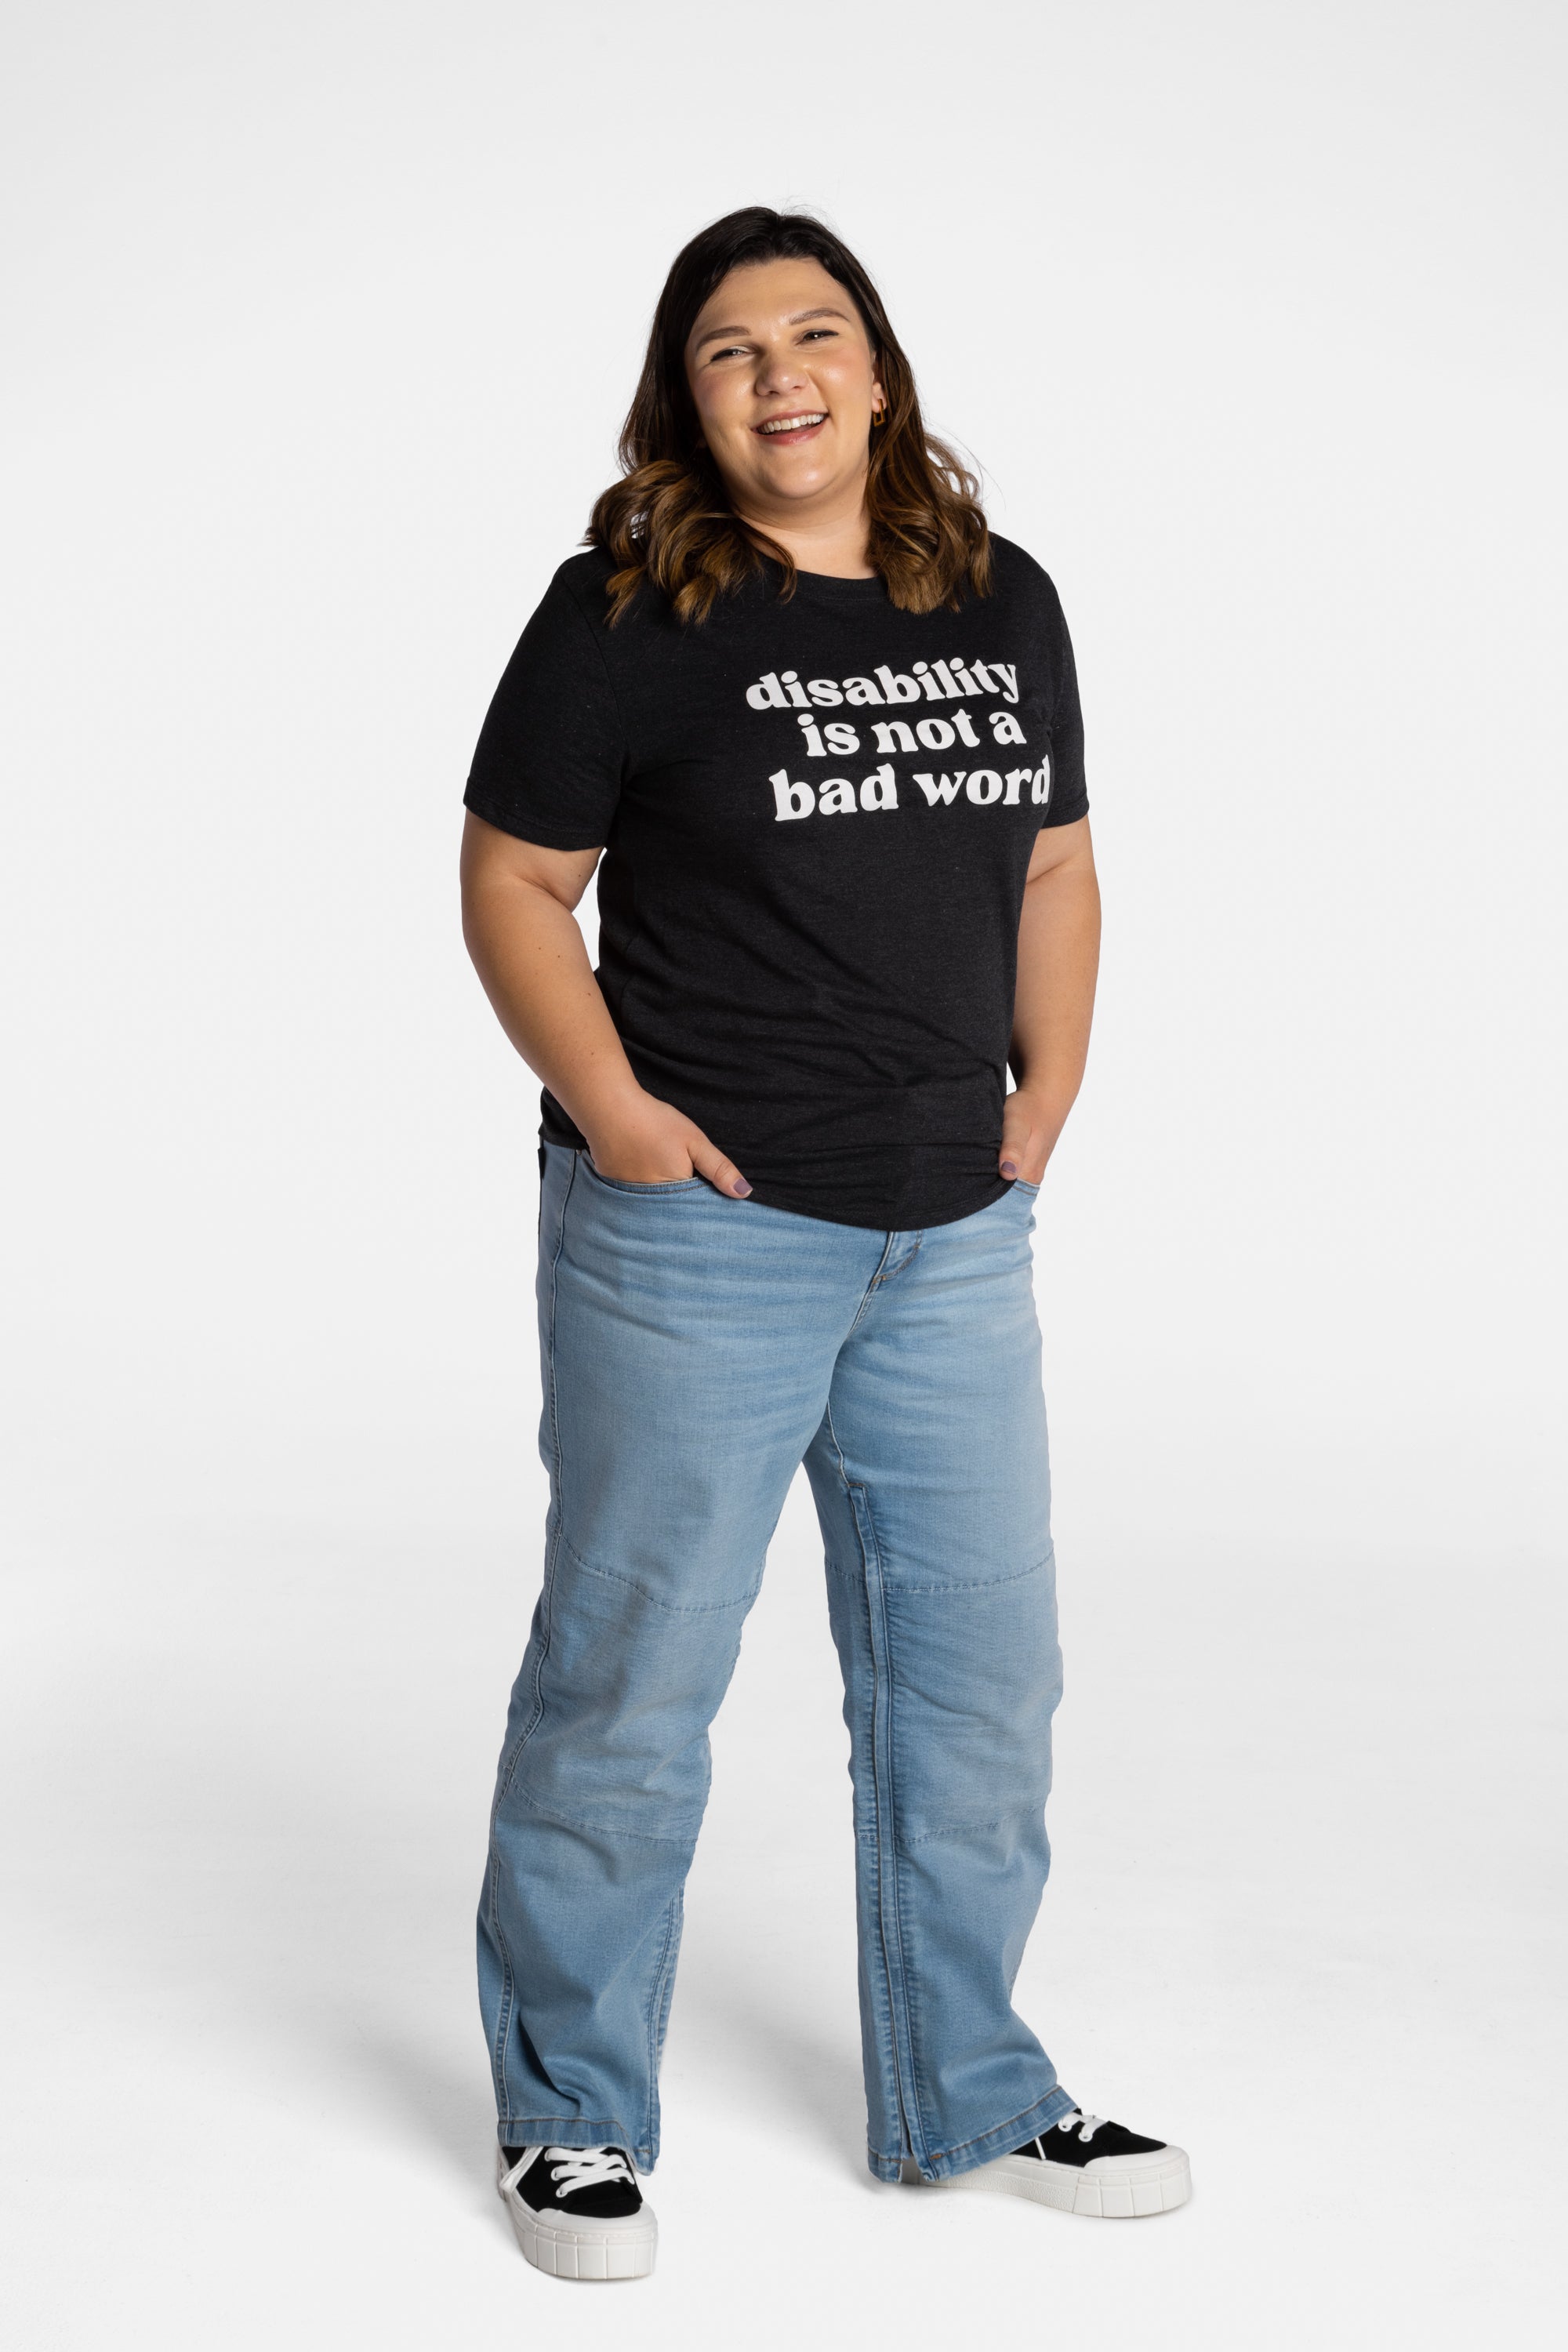 Erica Cole, the founder of No Limbits, A old white man with a black cane wears navy t-shirt with cream text that says "disability is not a bad word."